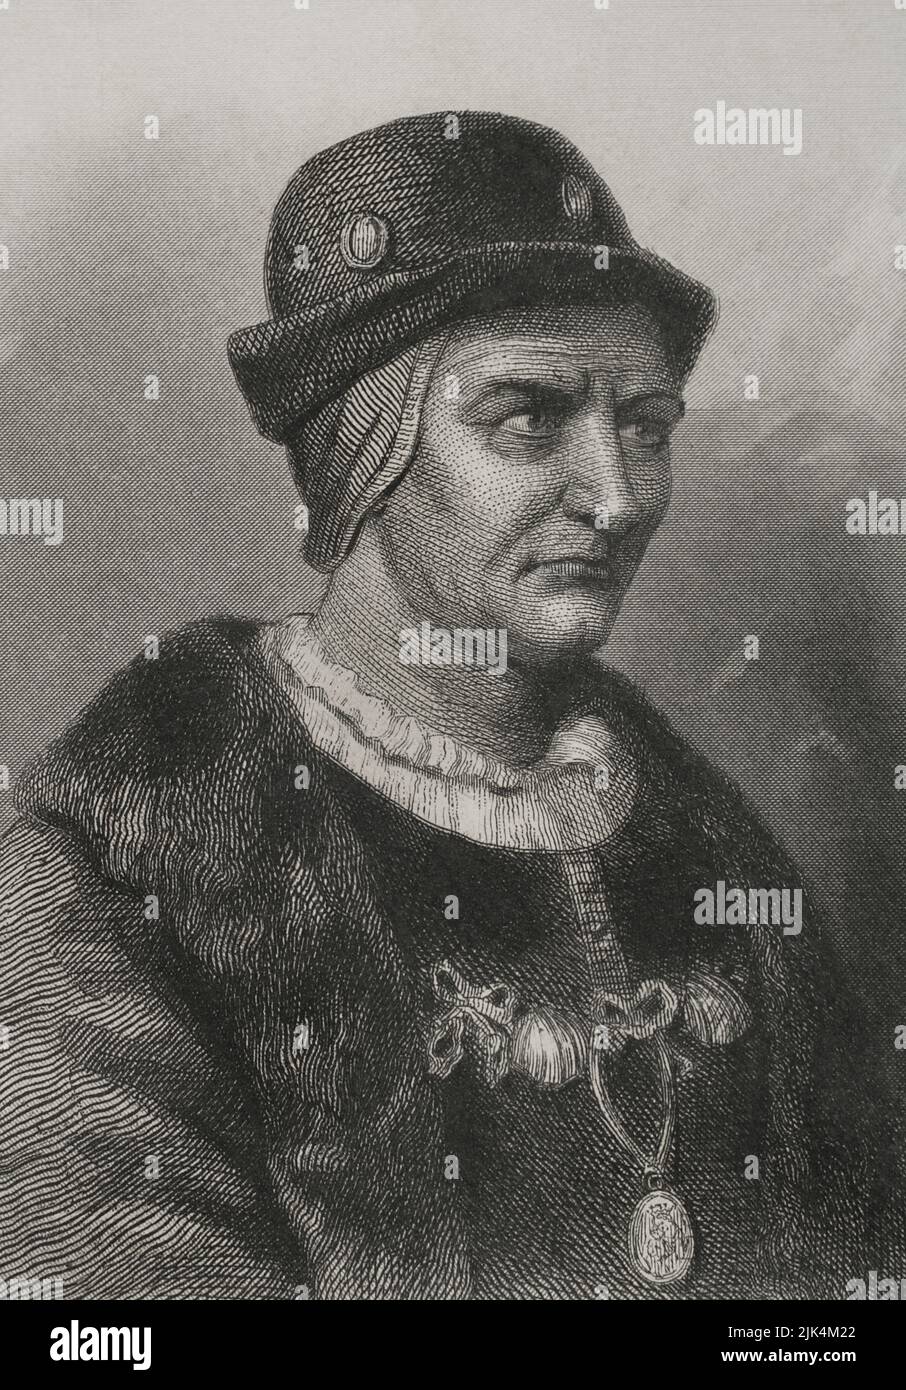 Louis XI (1423-1483), nicknamed "the Prudent". King of France (1461-1483). Portrait. Engraving by Geoffroy. "Historia Universal", by César Cantú. Volume IV, 1856. Stock Photo